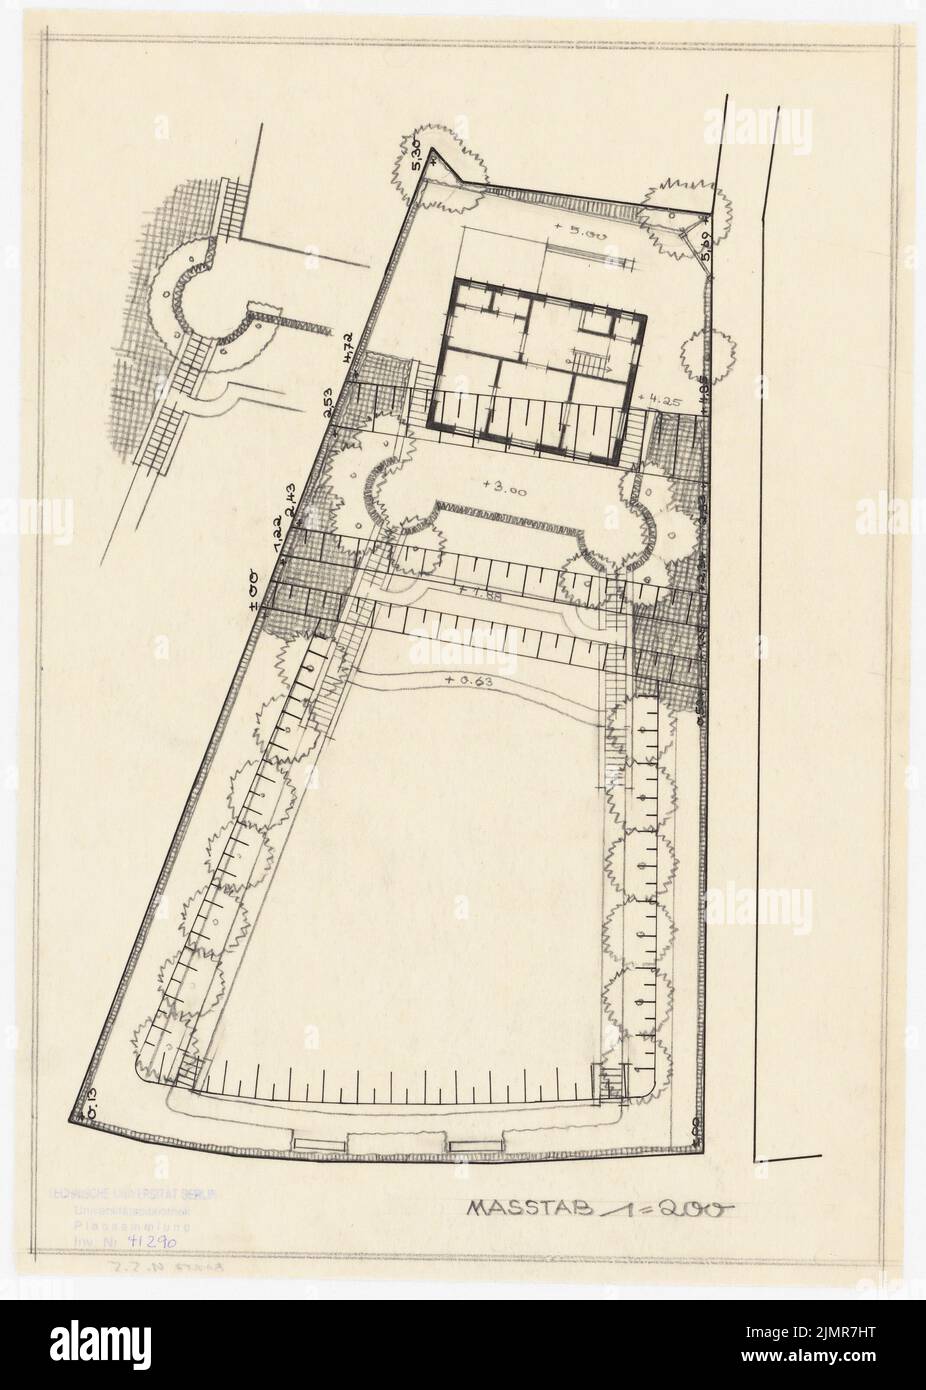 Barth Erwin (1880-1933), Parcel 17 in the »Luxus Bad Groß-Glienicke« in Berlin-Spandau (without Dat.): Garden: Ground Riss variant 4 with ground floor floor plan of the house and excerpt variant 1: 200. Ink and pencil on transparent, 38.1 x 27.2 cm (including scan edges) Barth Erwin  (1880-1933): Parzelle 17 im »Luxusbad Groß-Glienicke«, Berlin-Spandau Stock Photo